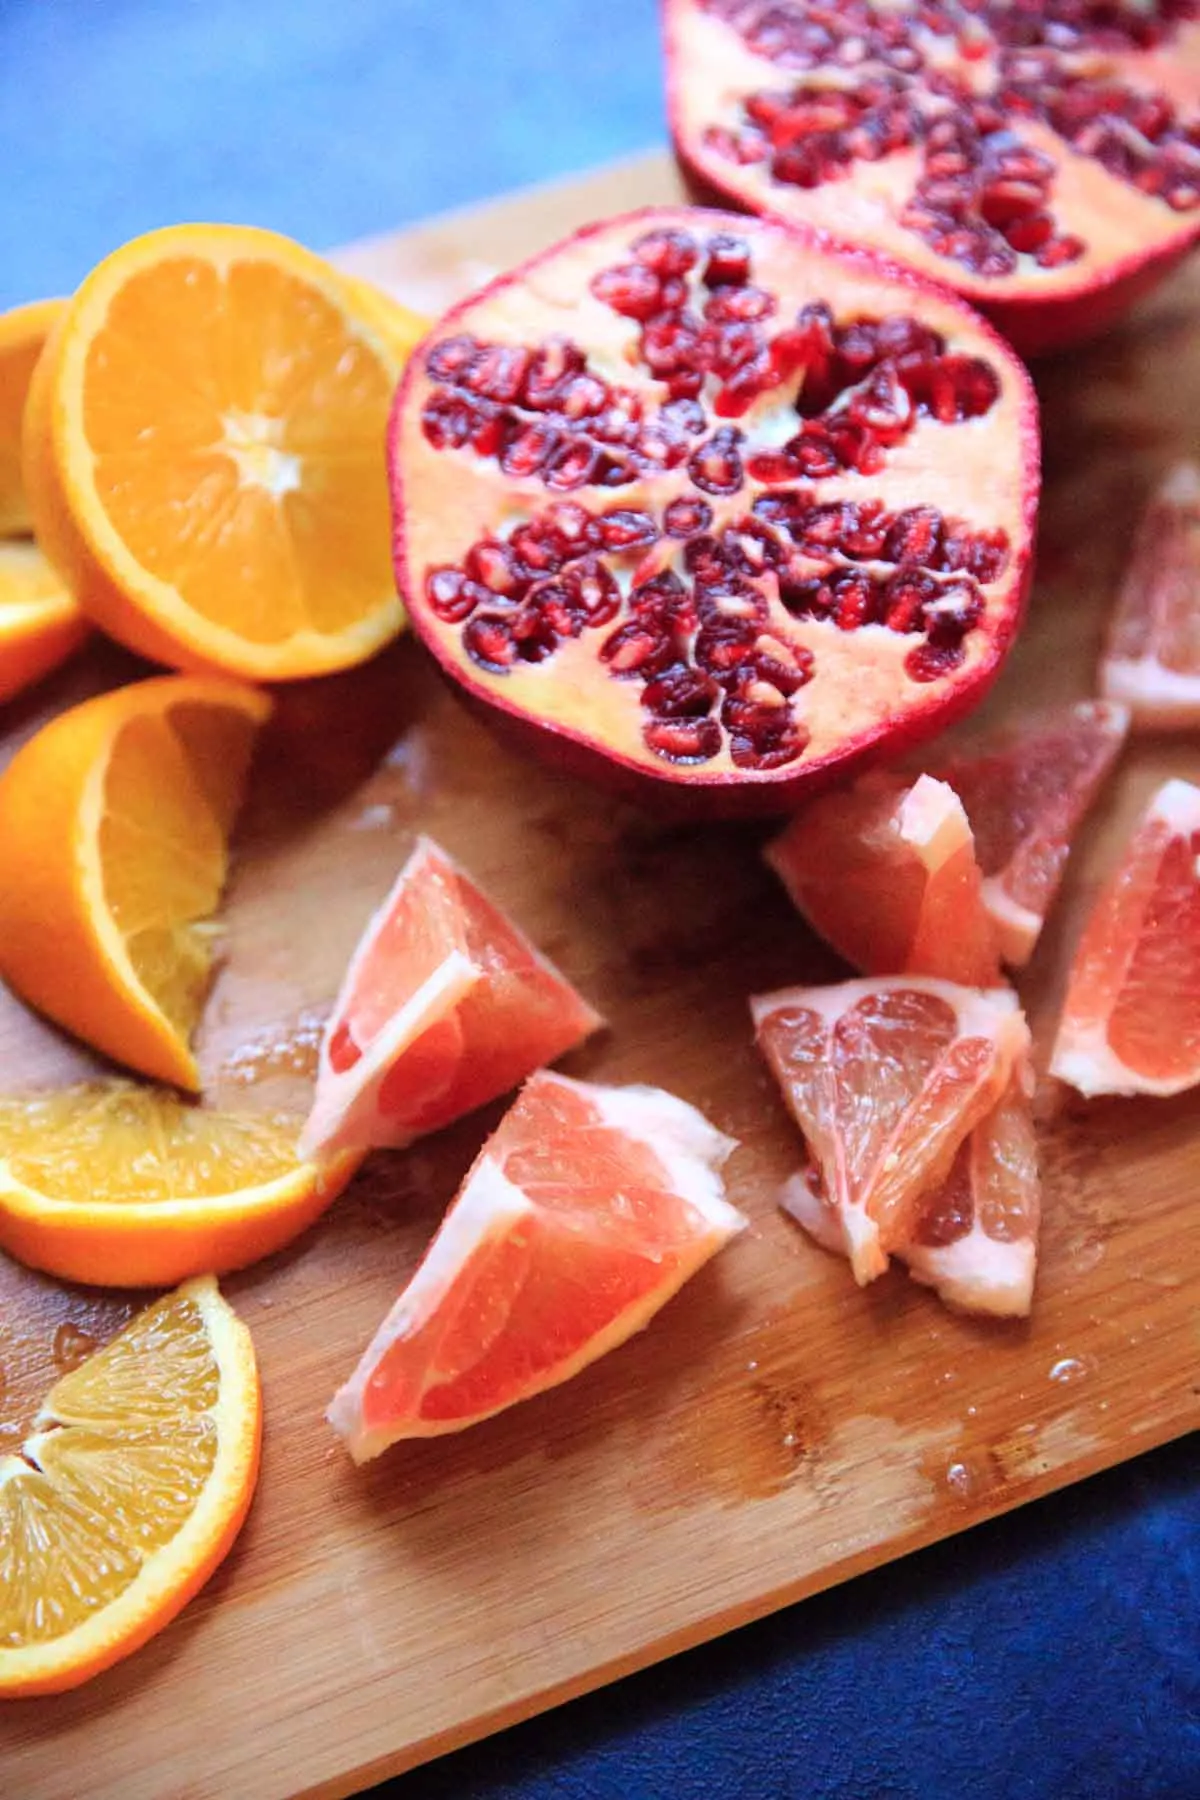 cut up oranges, pomegranate and pomelo pieces on cutting board